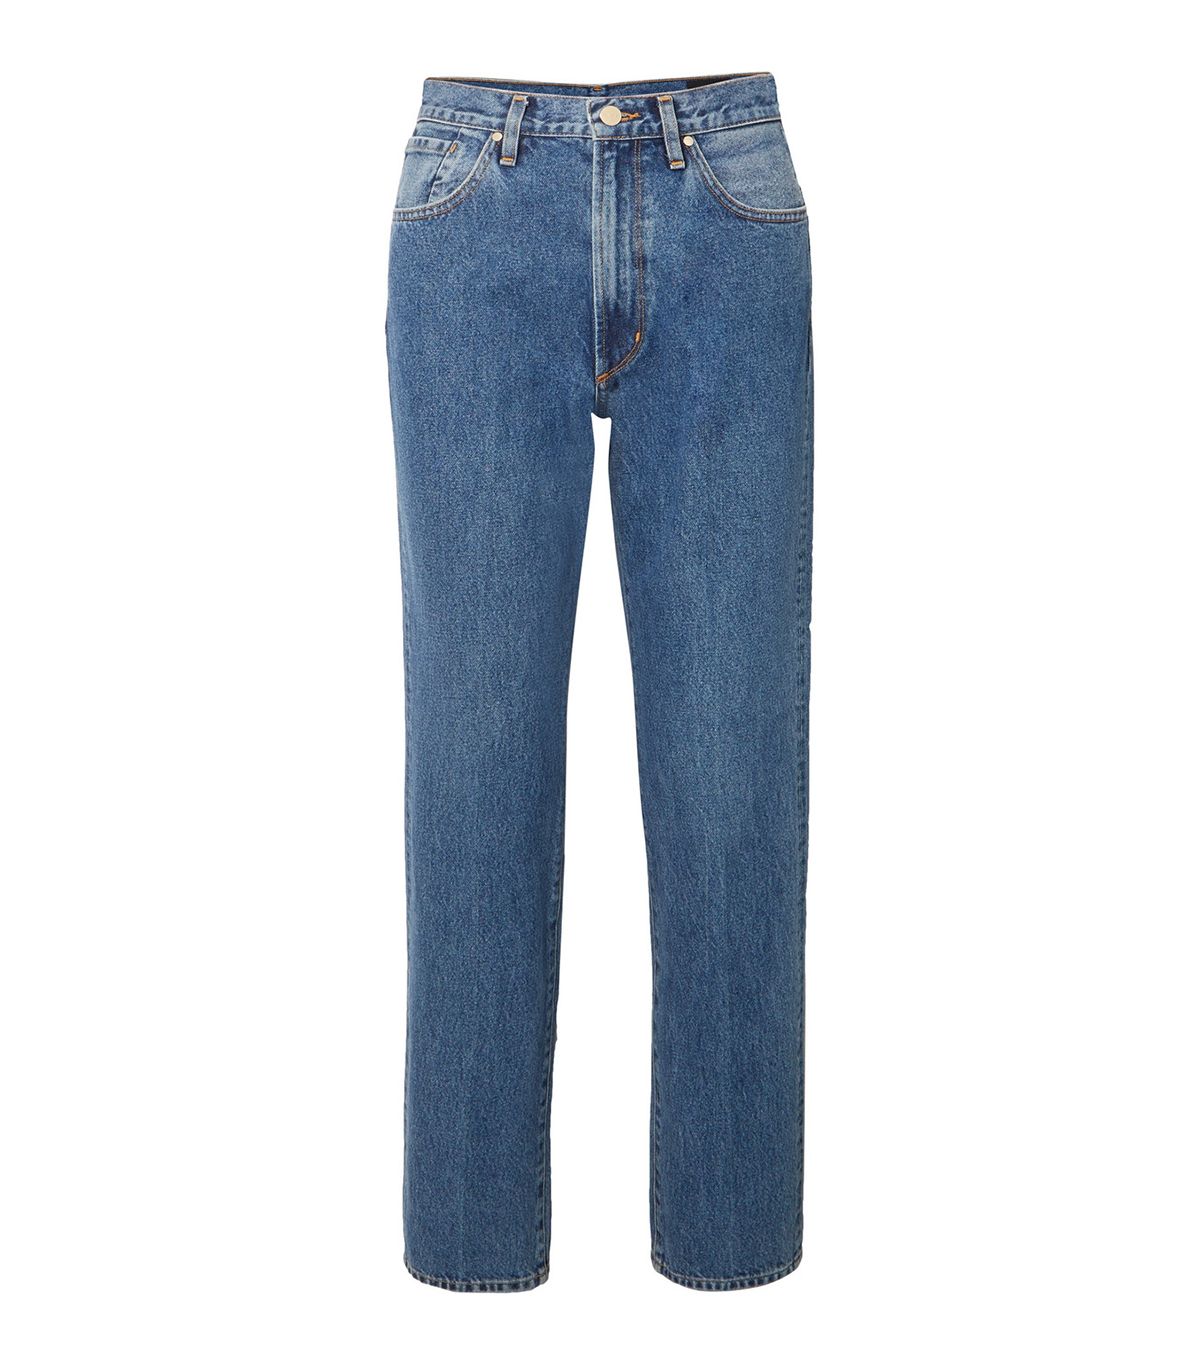 4 Denim Styles for Women That Aren't Skinny Jeans | Who What Wear